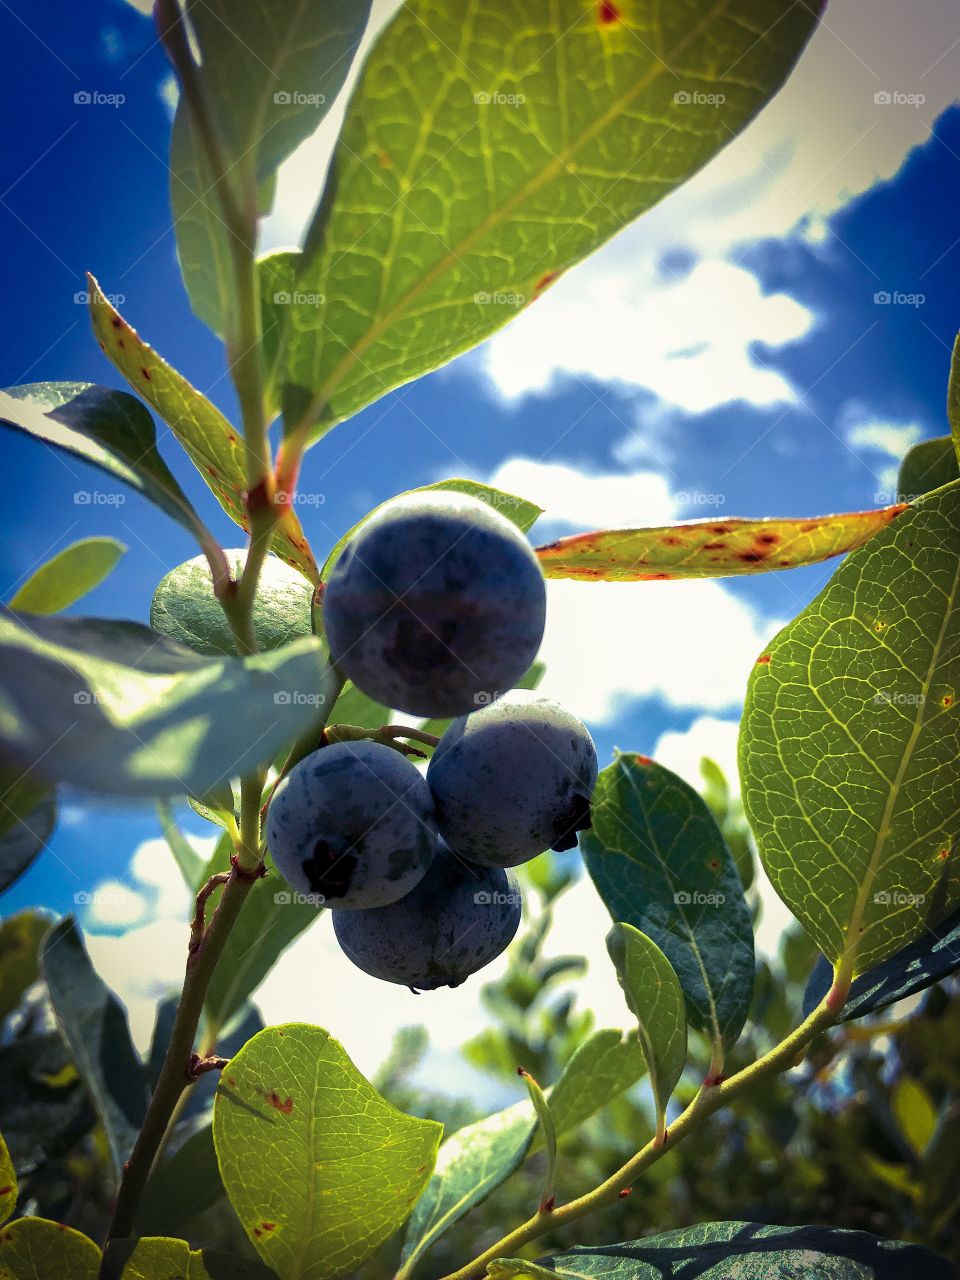 Beautiful Blueberries, ripe for the pickin'